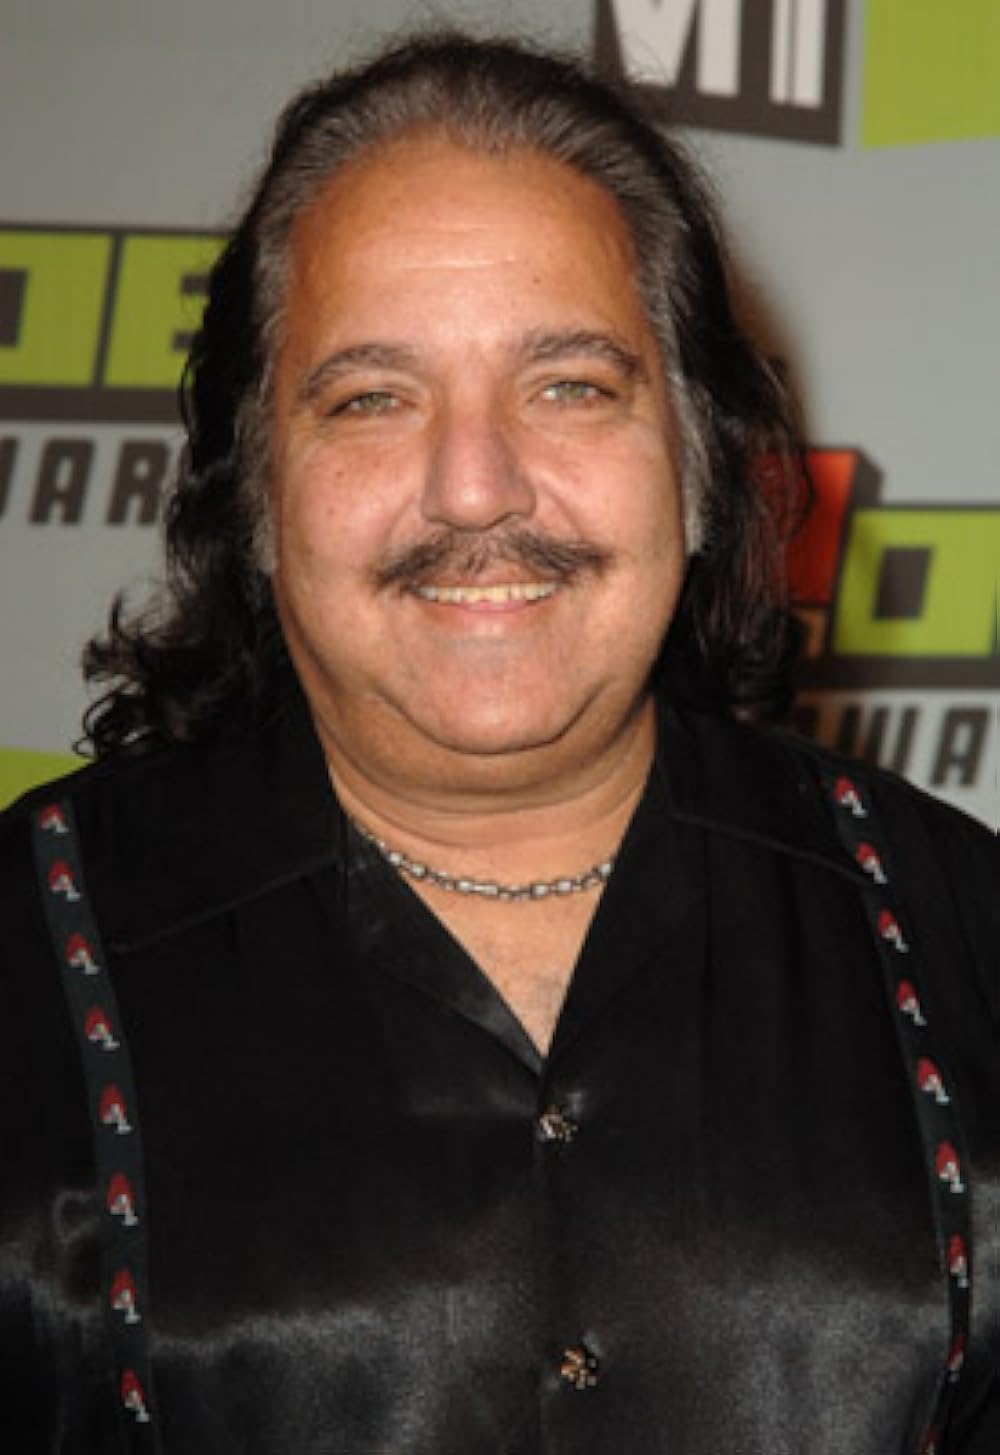 dimitri kostakis recommends ron jeremy facial pic